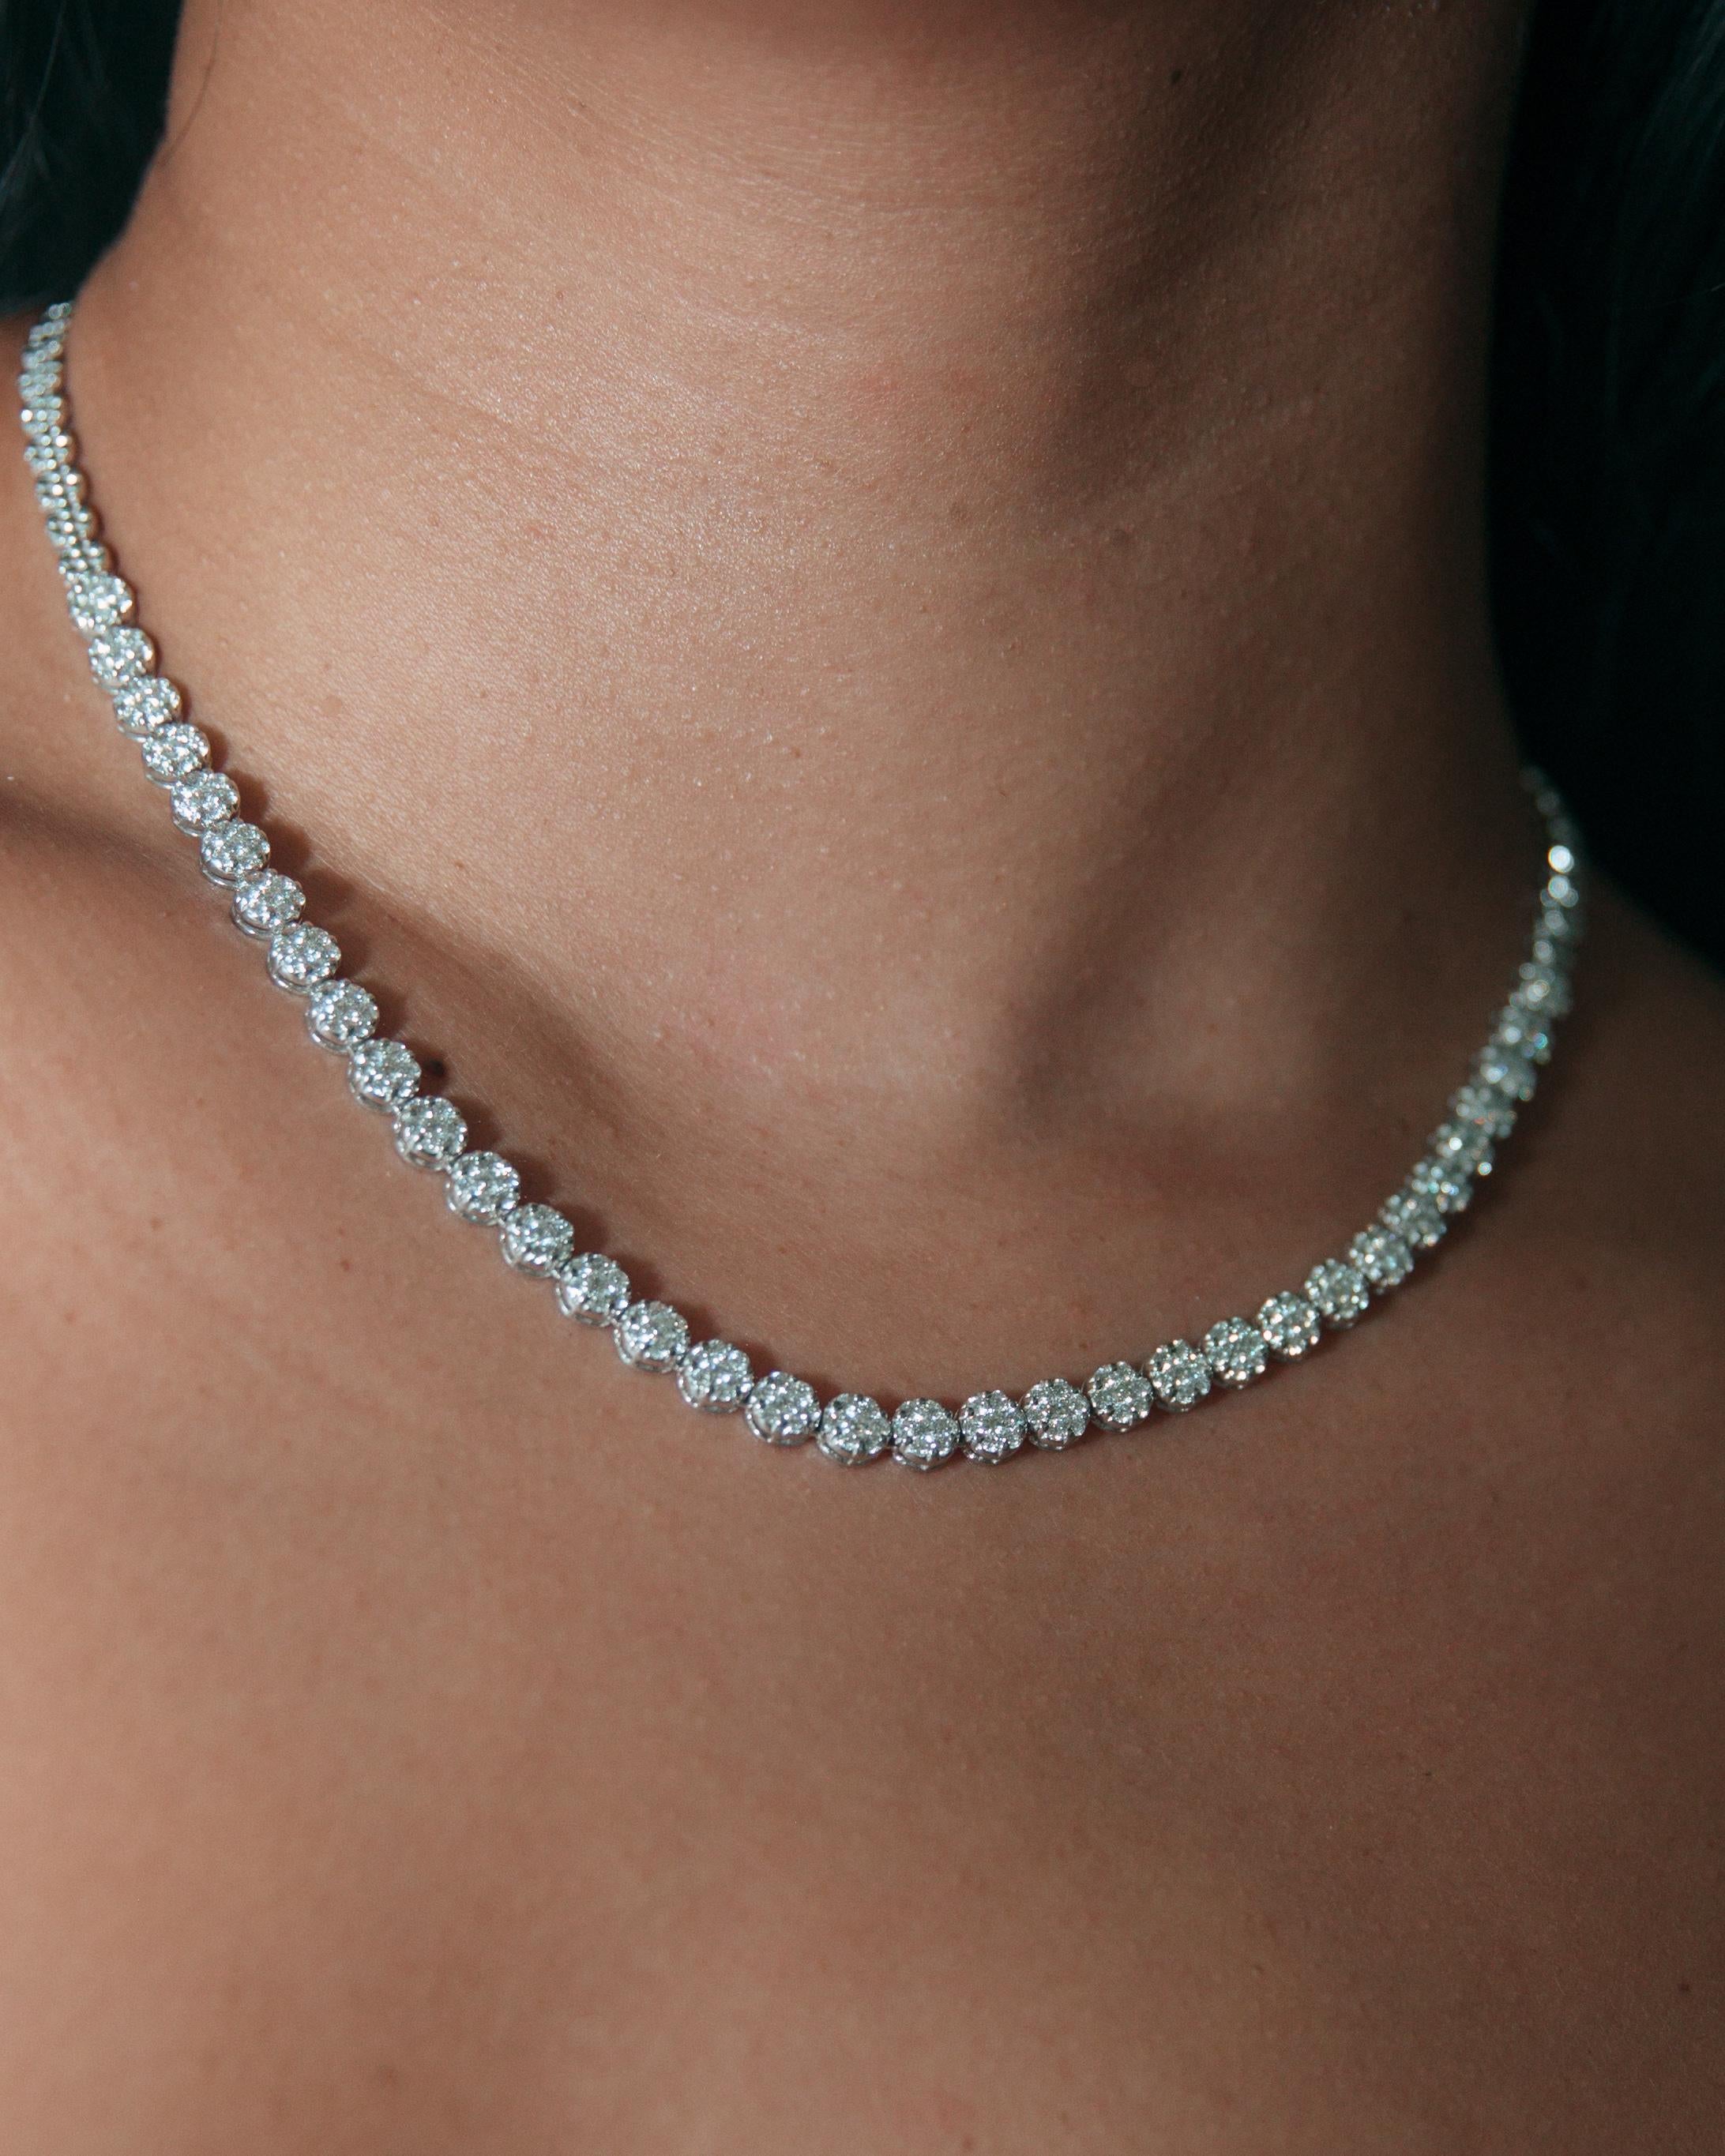 Make a statement with this luxurious 4.61ct t.w. diamond statement invisible set tennis necklace. Boasting a timeless floral design, this dazzling piece is sure to make a lasting impression.

Product Details:

272 Round Brilliant Diamond

Total